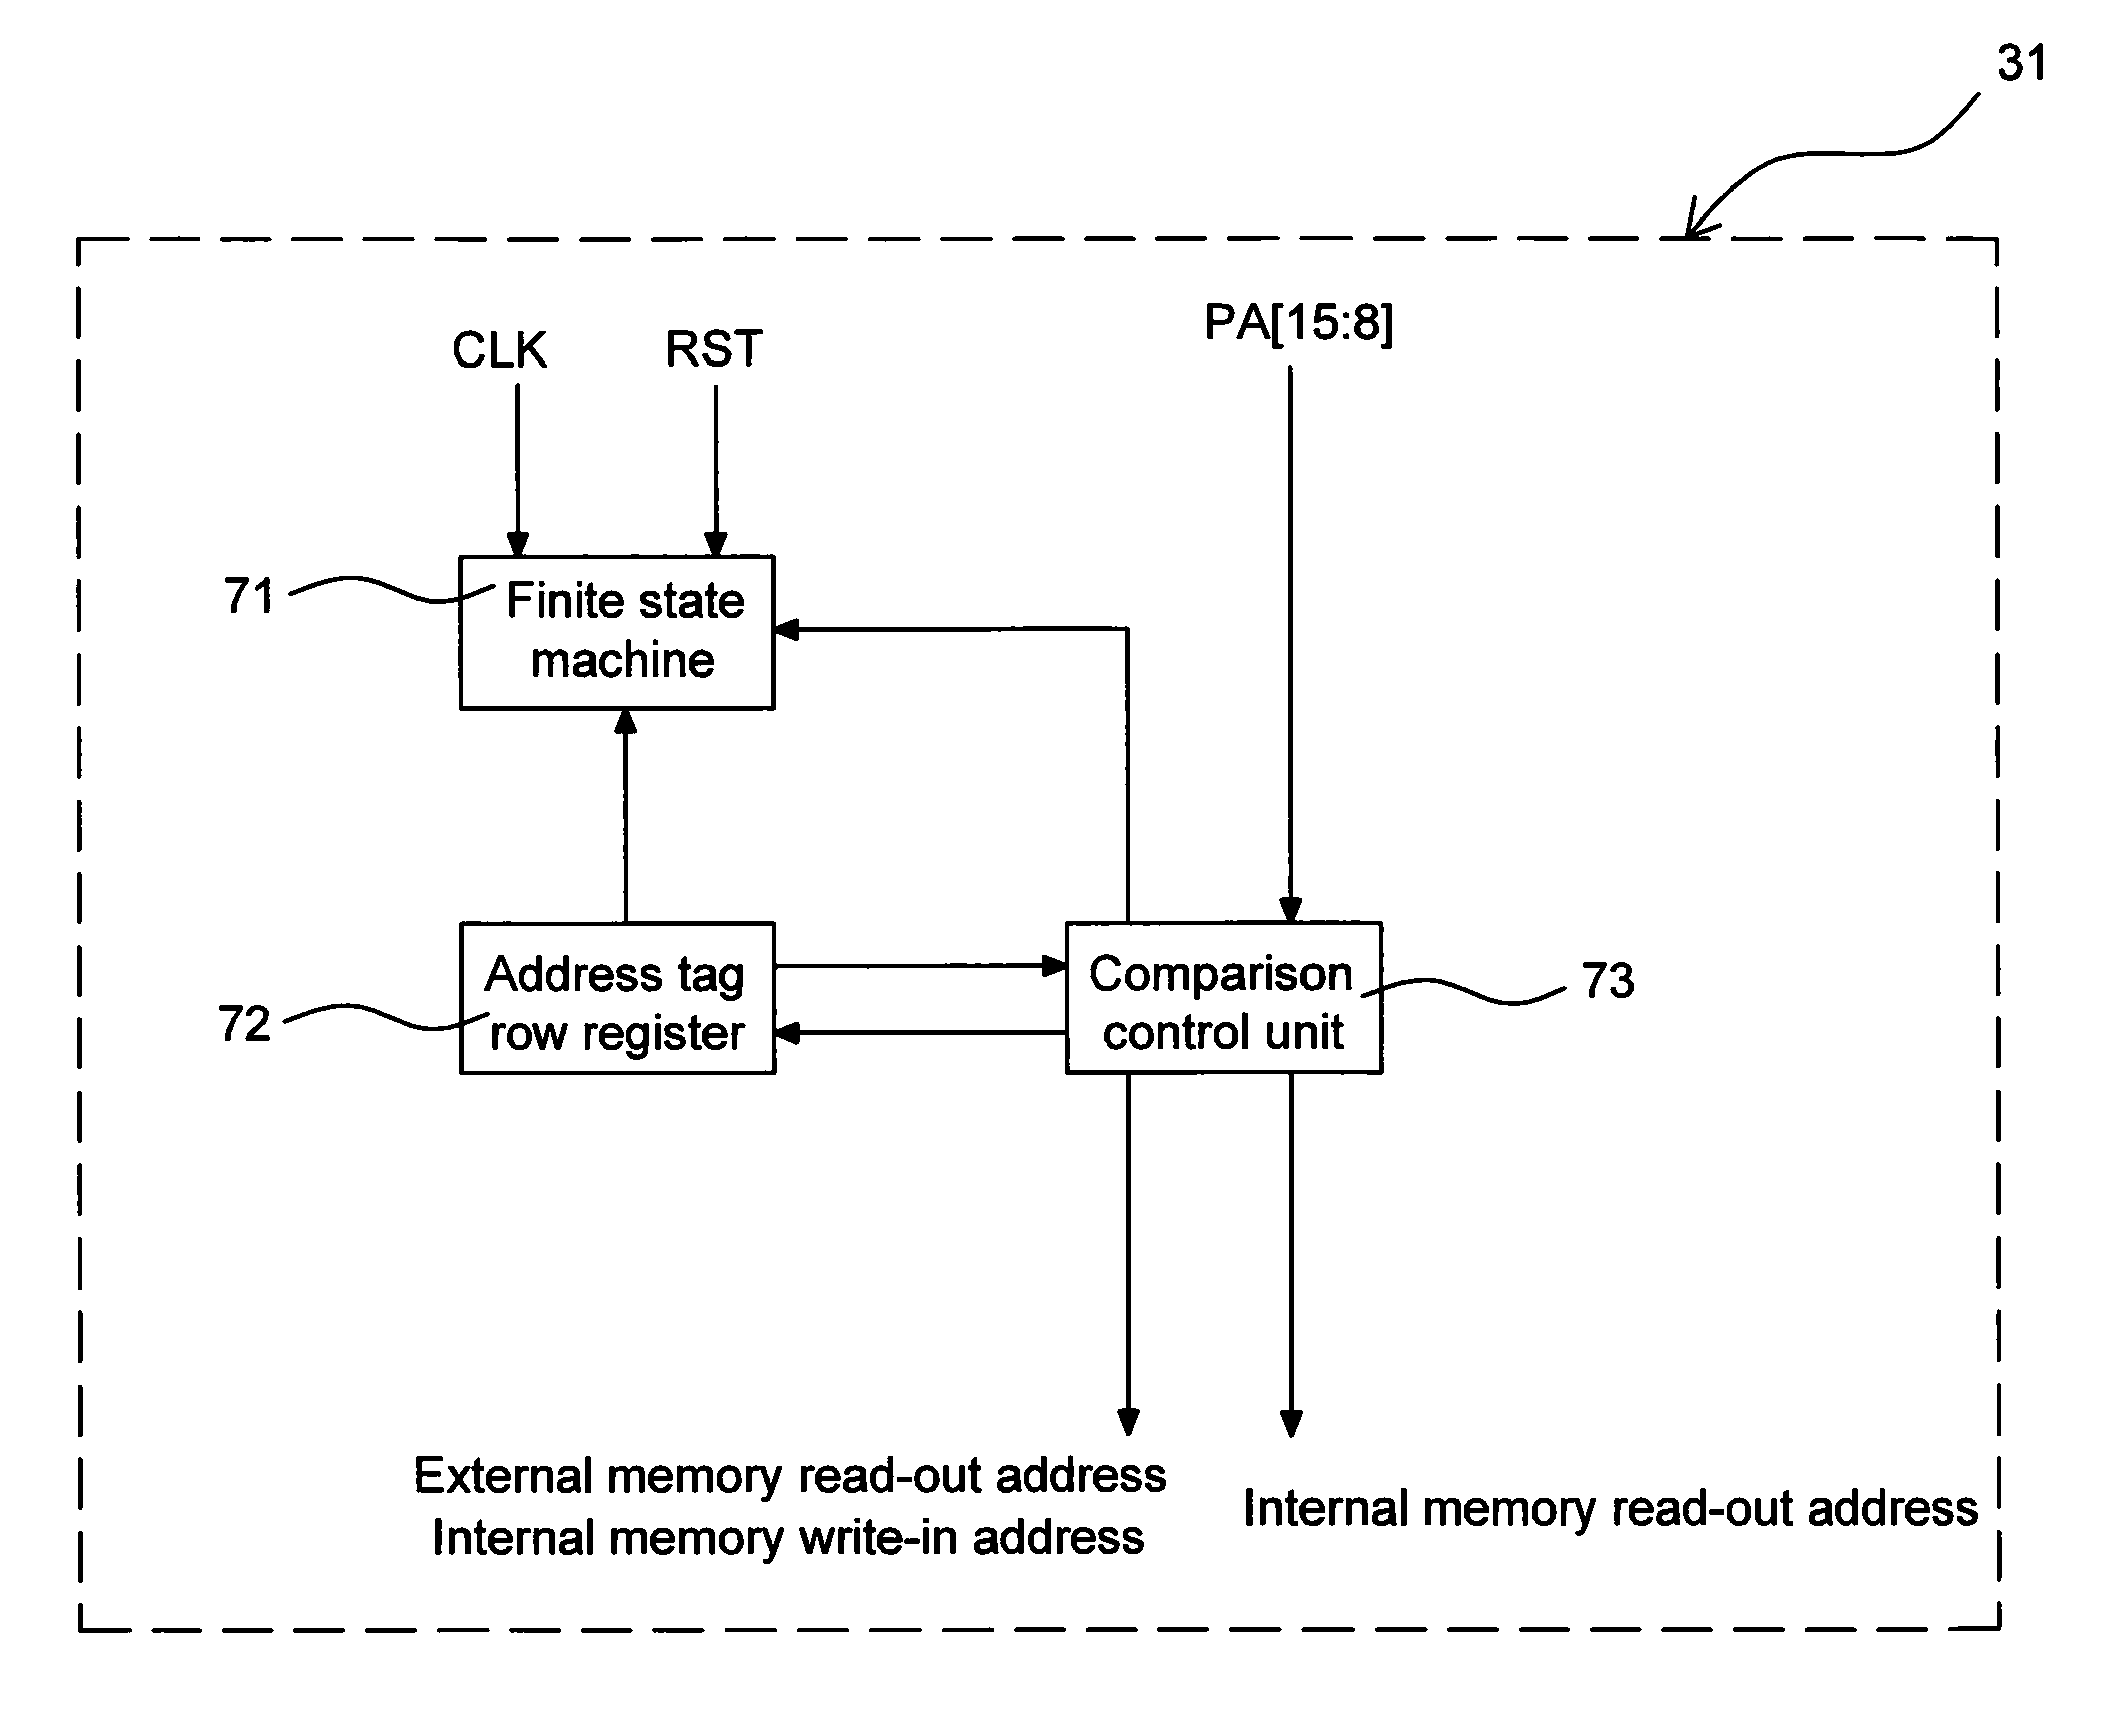 Serial interface cache controller, control method and micro-controller system using the same